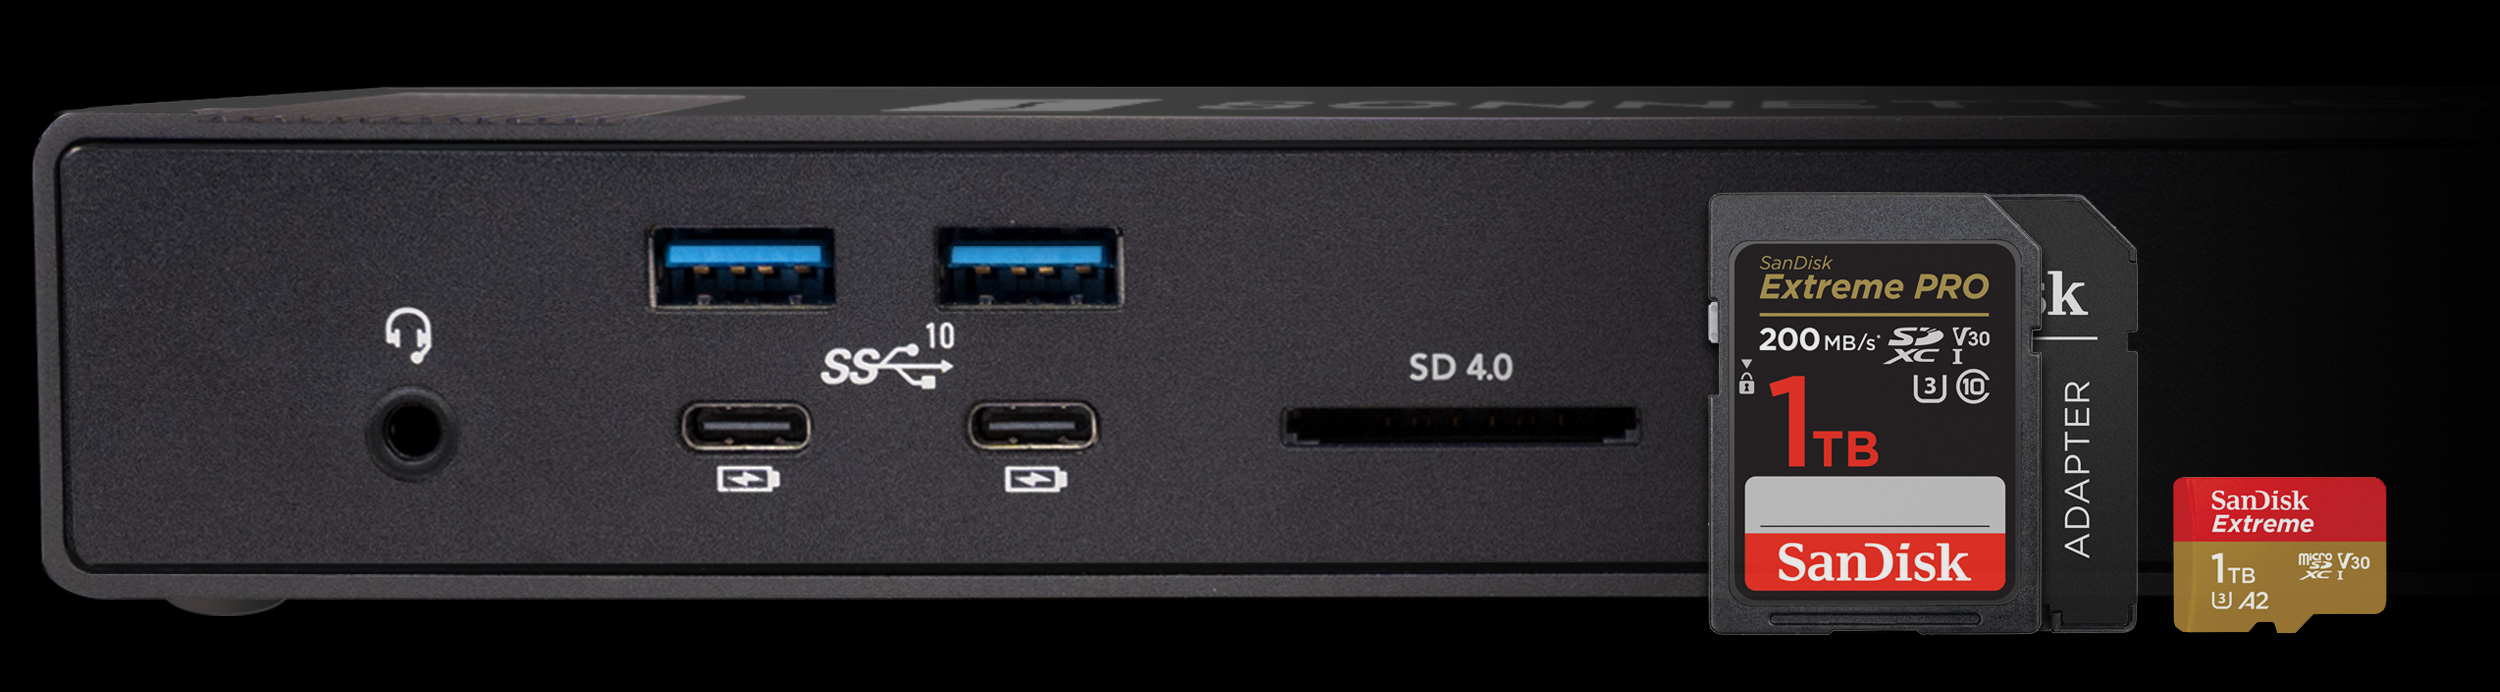 Echo 20 Thunderbolt 4 SuperDock SD Slot with SD Cards